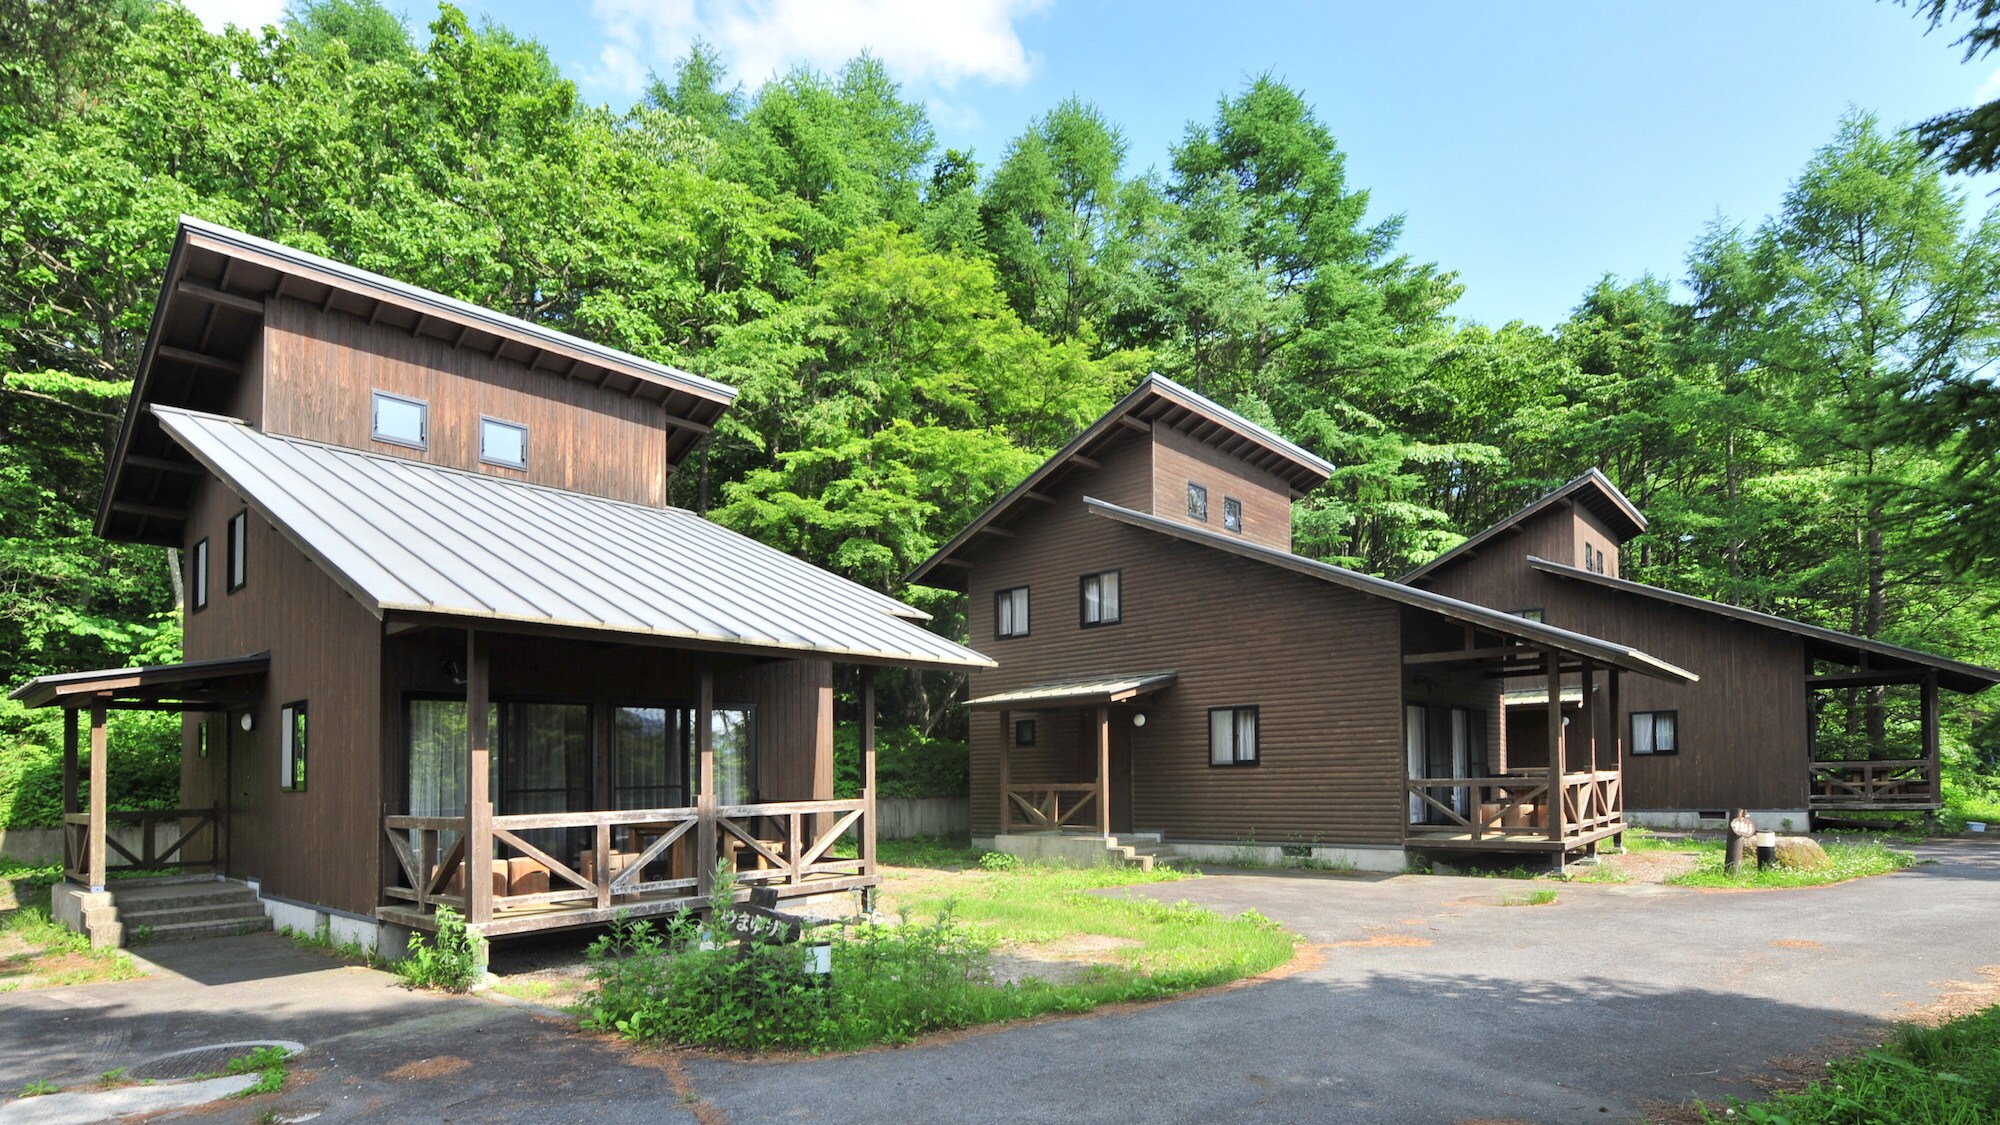 [Cottage] Perfect for enjoying freely with close friends. A hot spring is drawn from the source for each building.